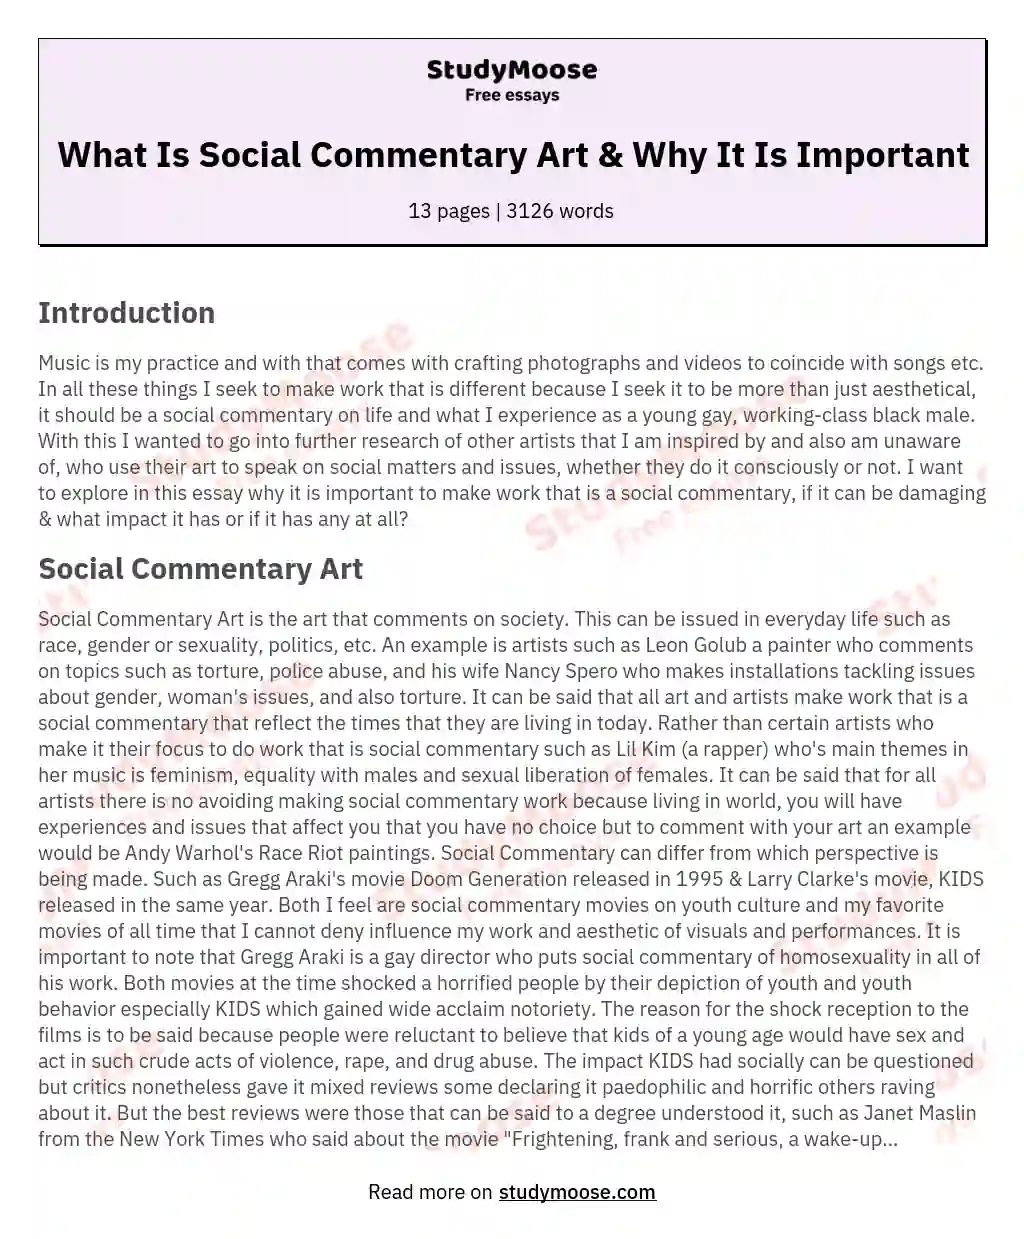 What Is Social Commentary Art & Why It Is Important